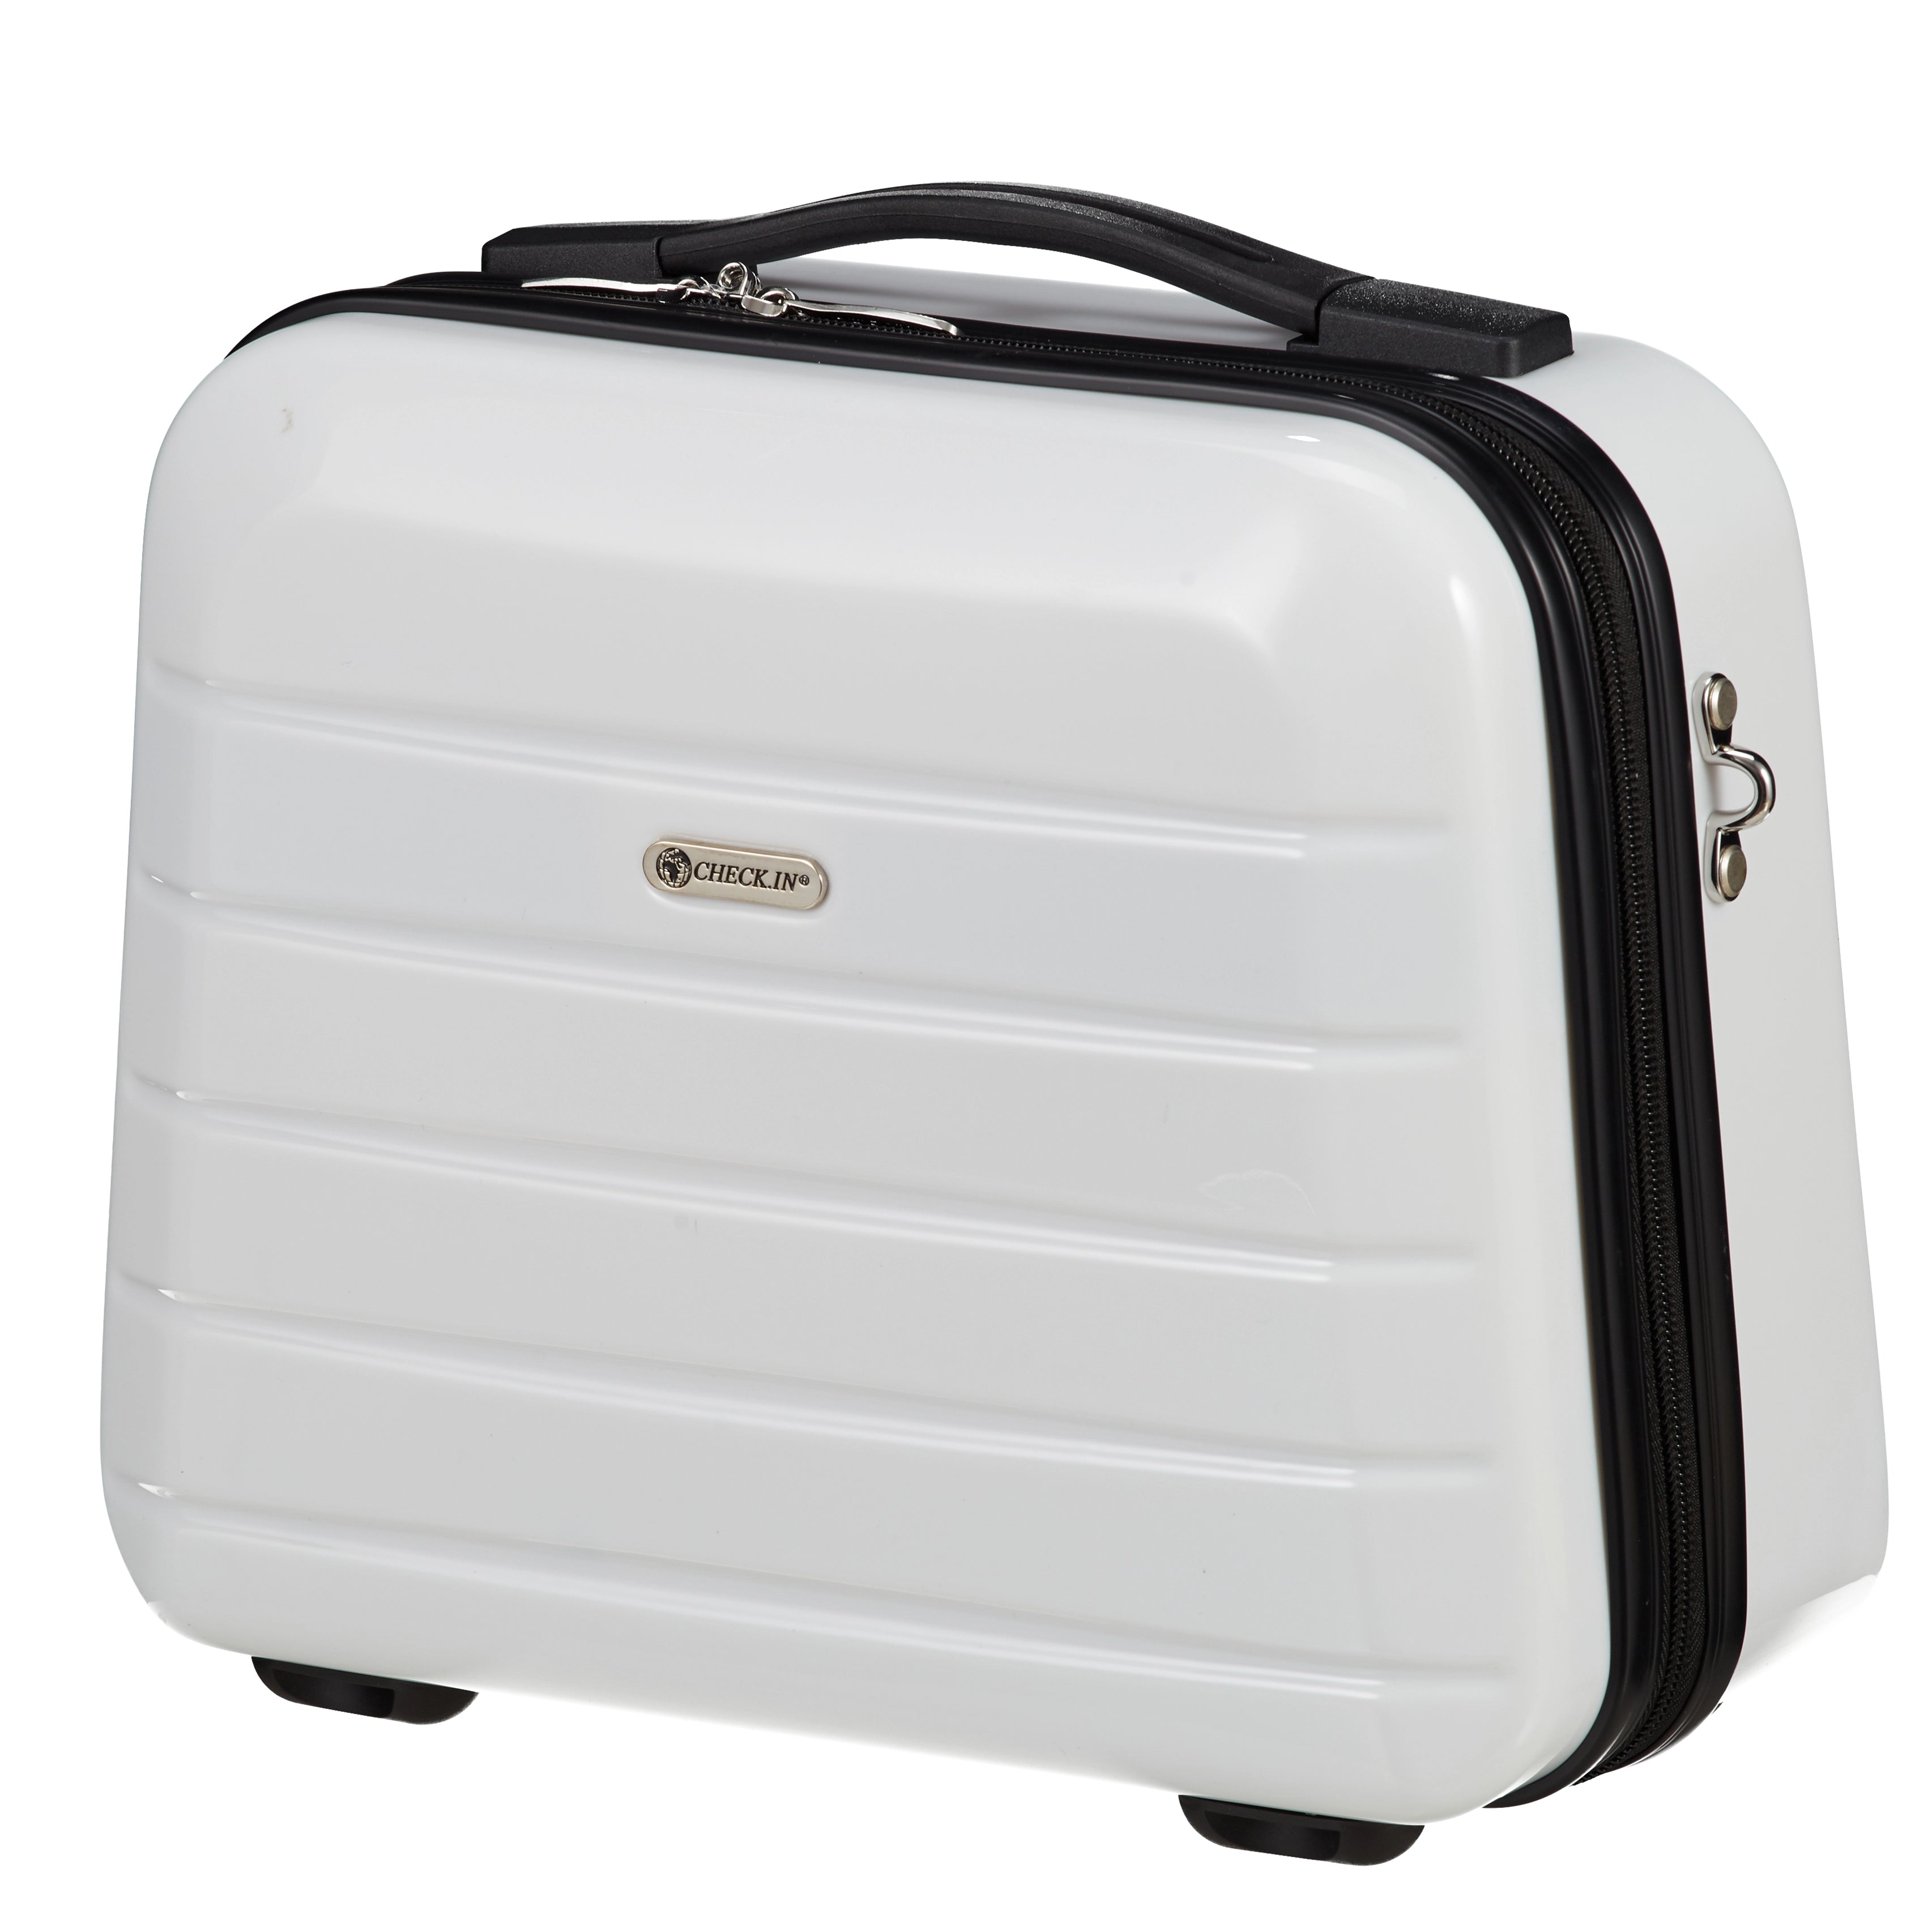 Check In London 2.0 Cosmetic case 33 cm - White